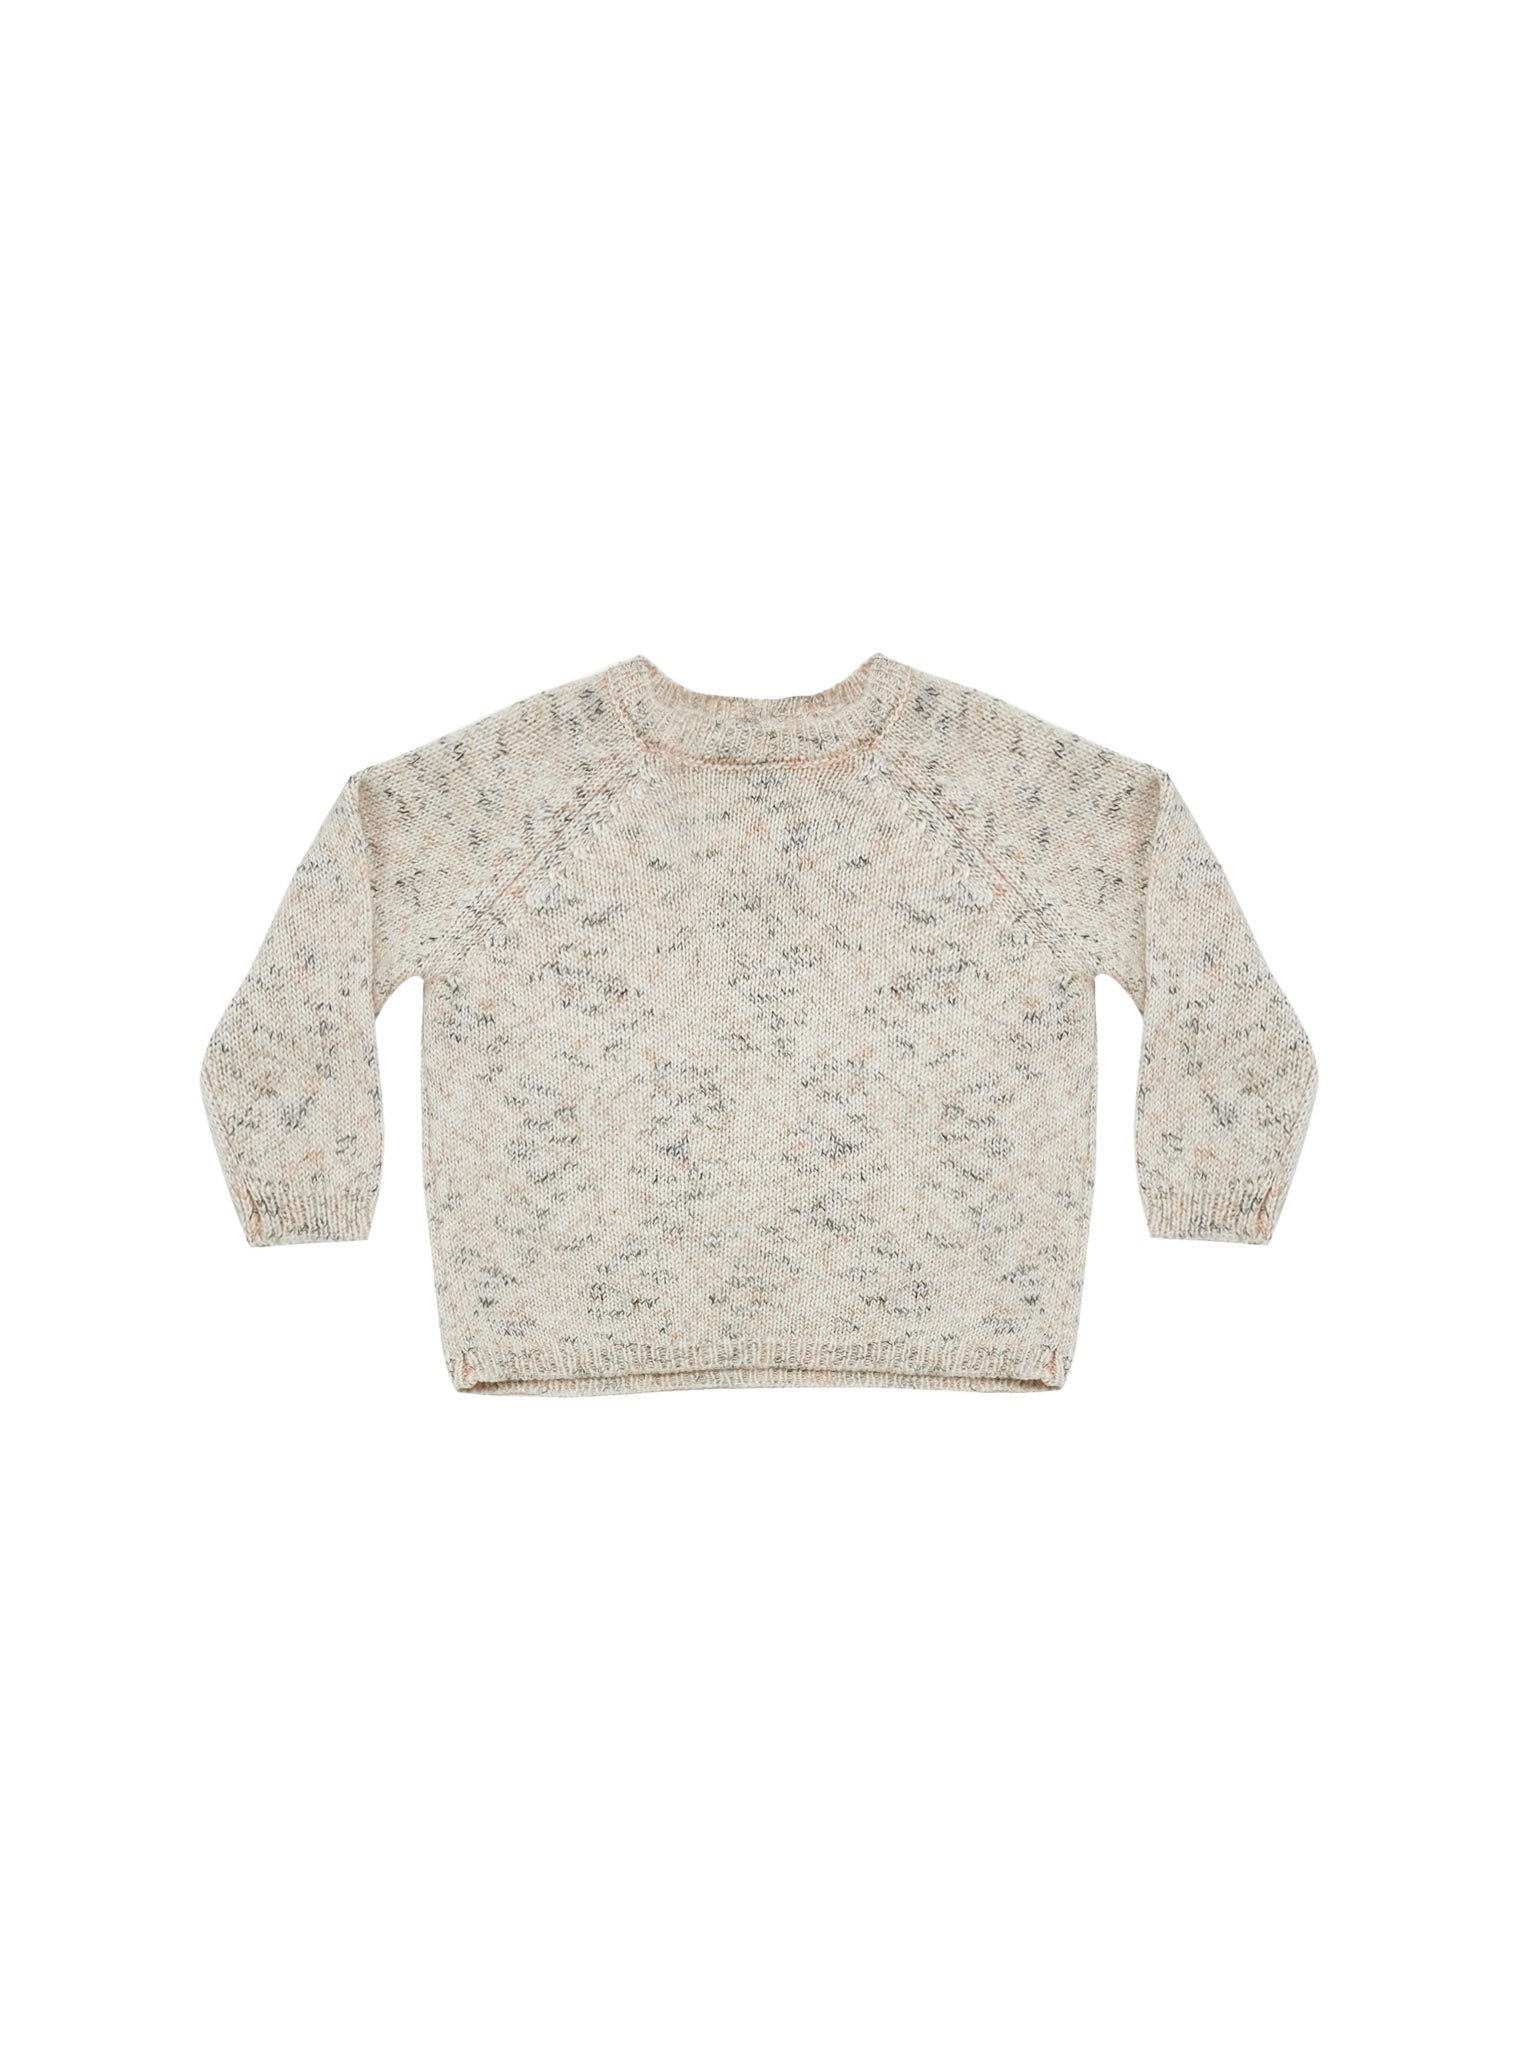 SPECKLED KNIT SWEATER | NATURAL